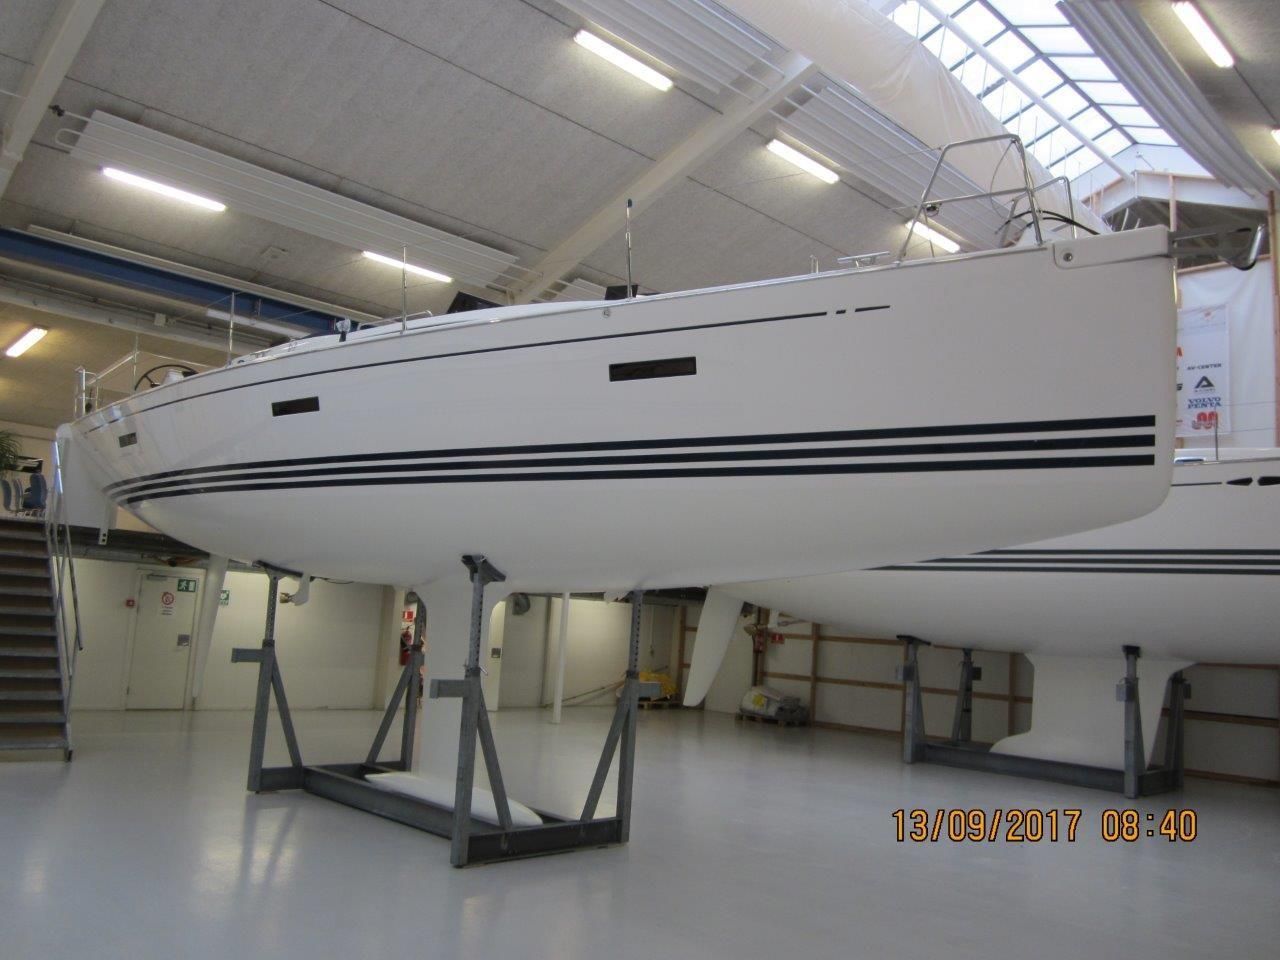 x yachts xp 38 for sale